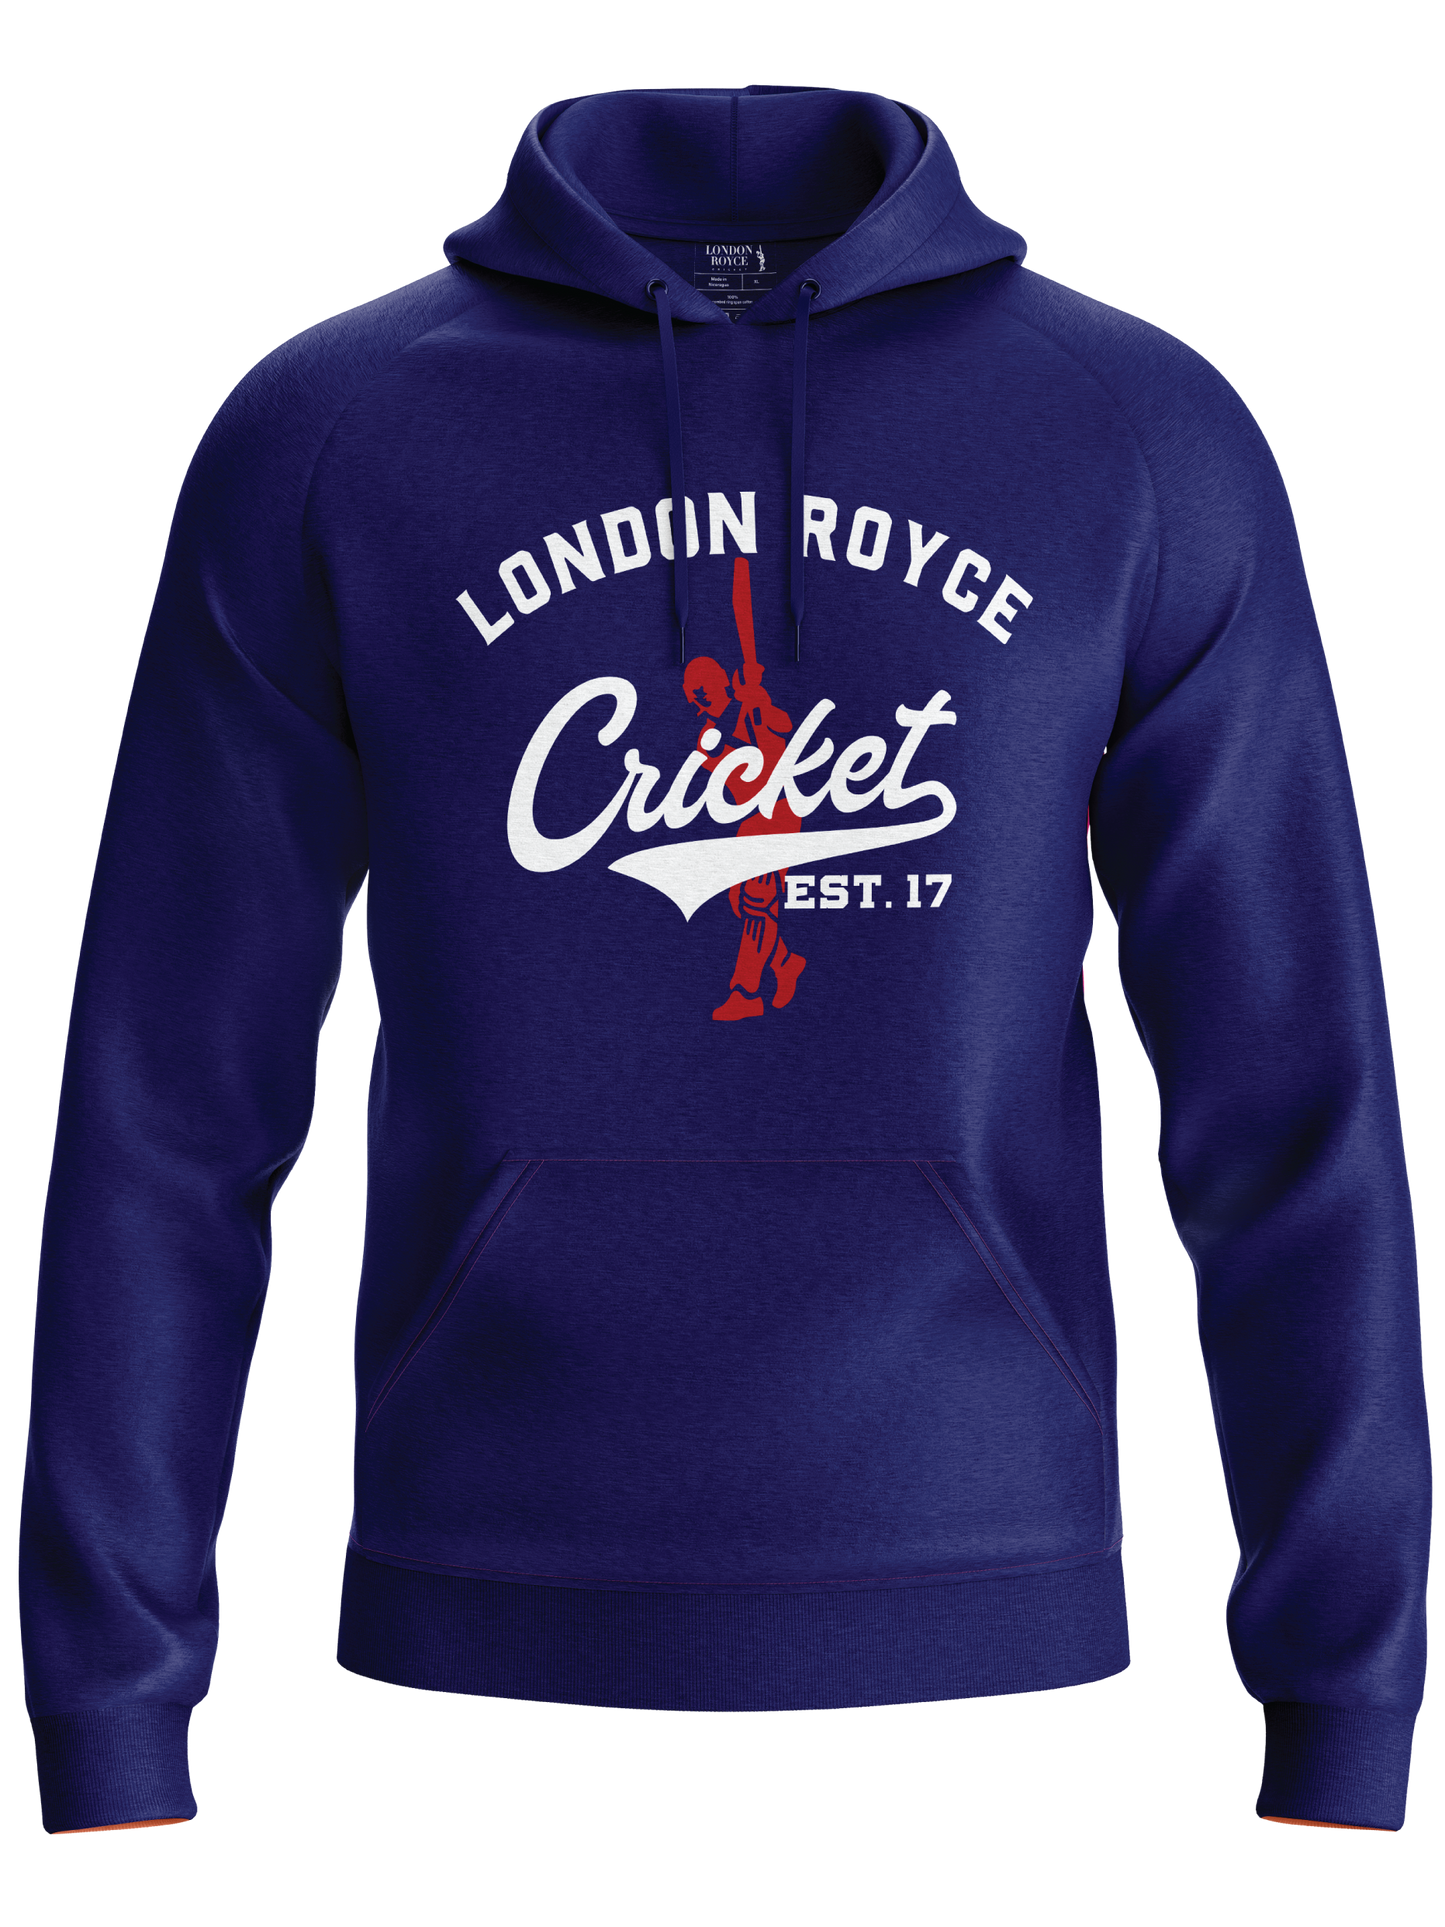 CLASSIC CRICKET PULLOVER HOODIE